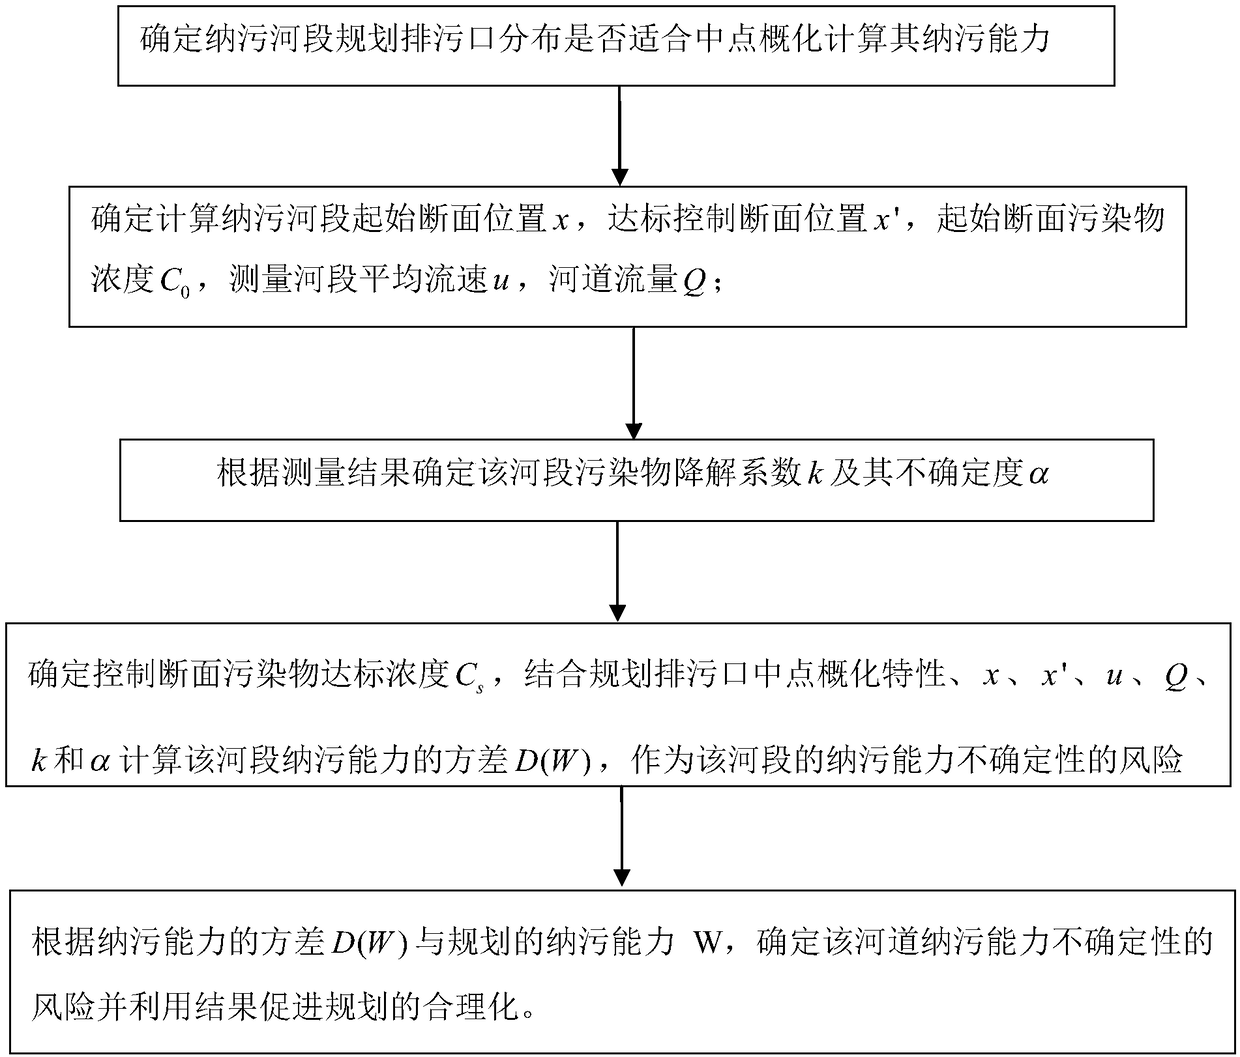 Midpoint generalized watercourse pollution-holding capability risk estimation and planning rationalization promotion method